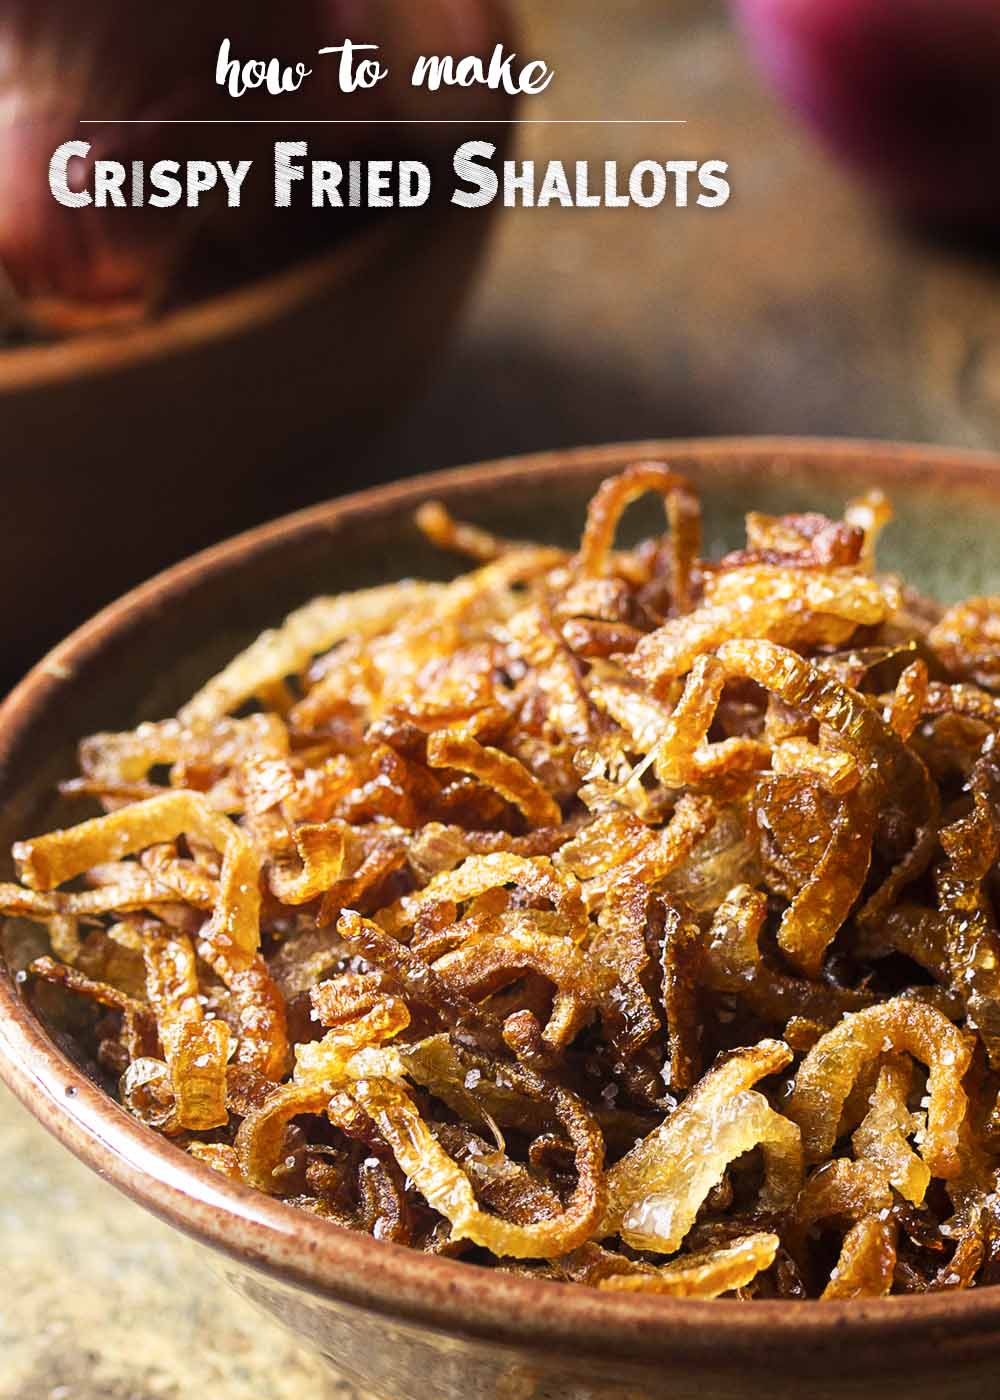 Making crispy fried shallots is a simple and easy process! All you need are three ingredients and a little time to get them golden brown. Gluten-free. Vegan. | justalittlebitofbacon.com